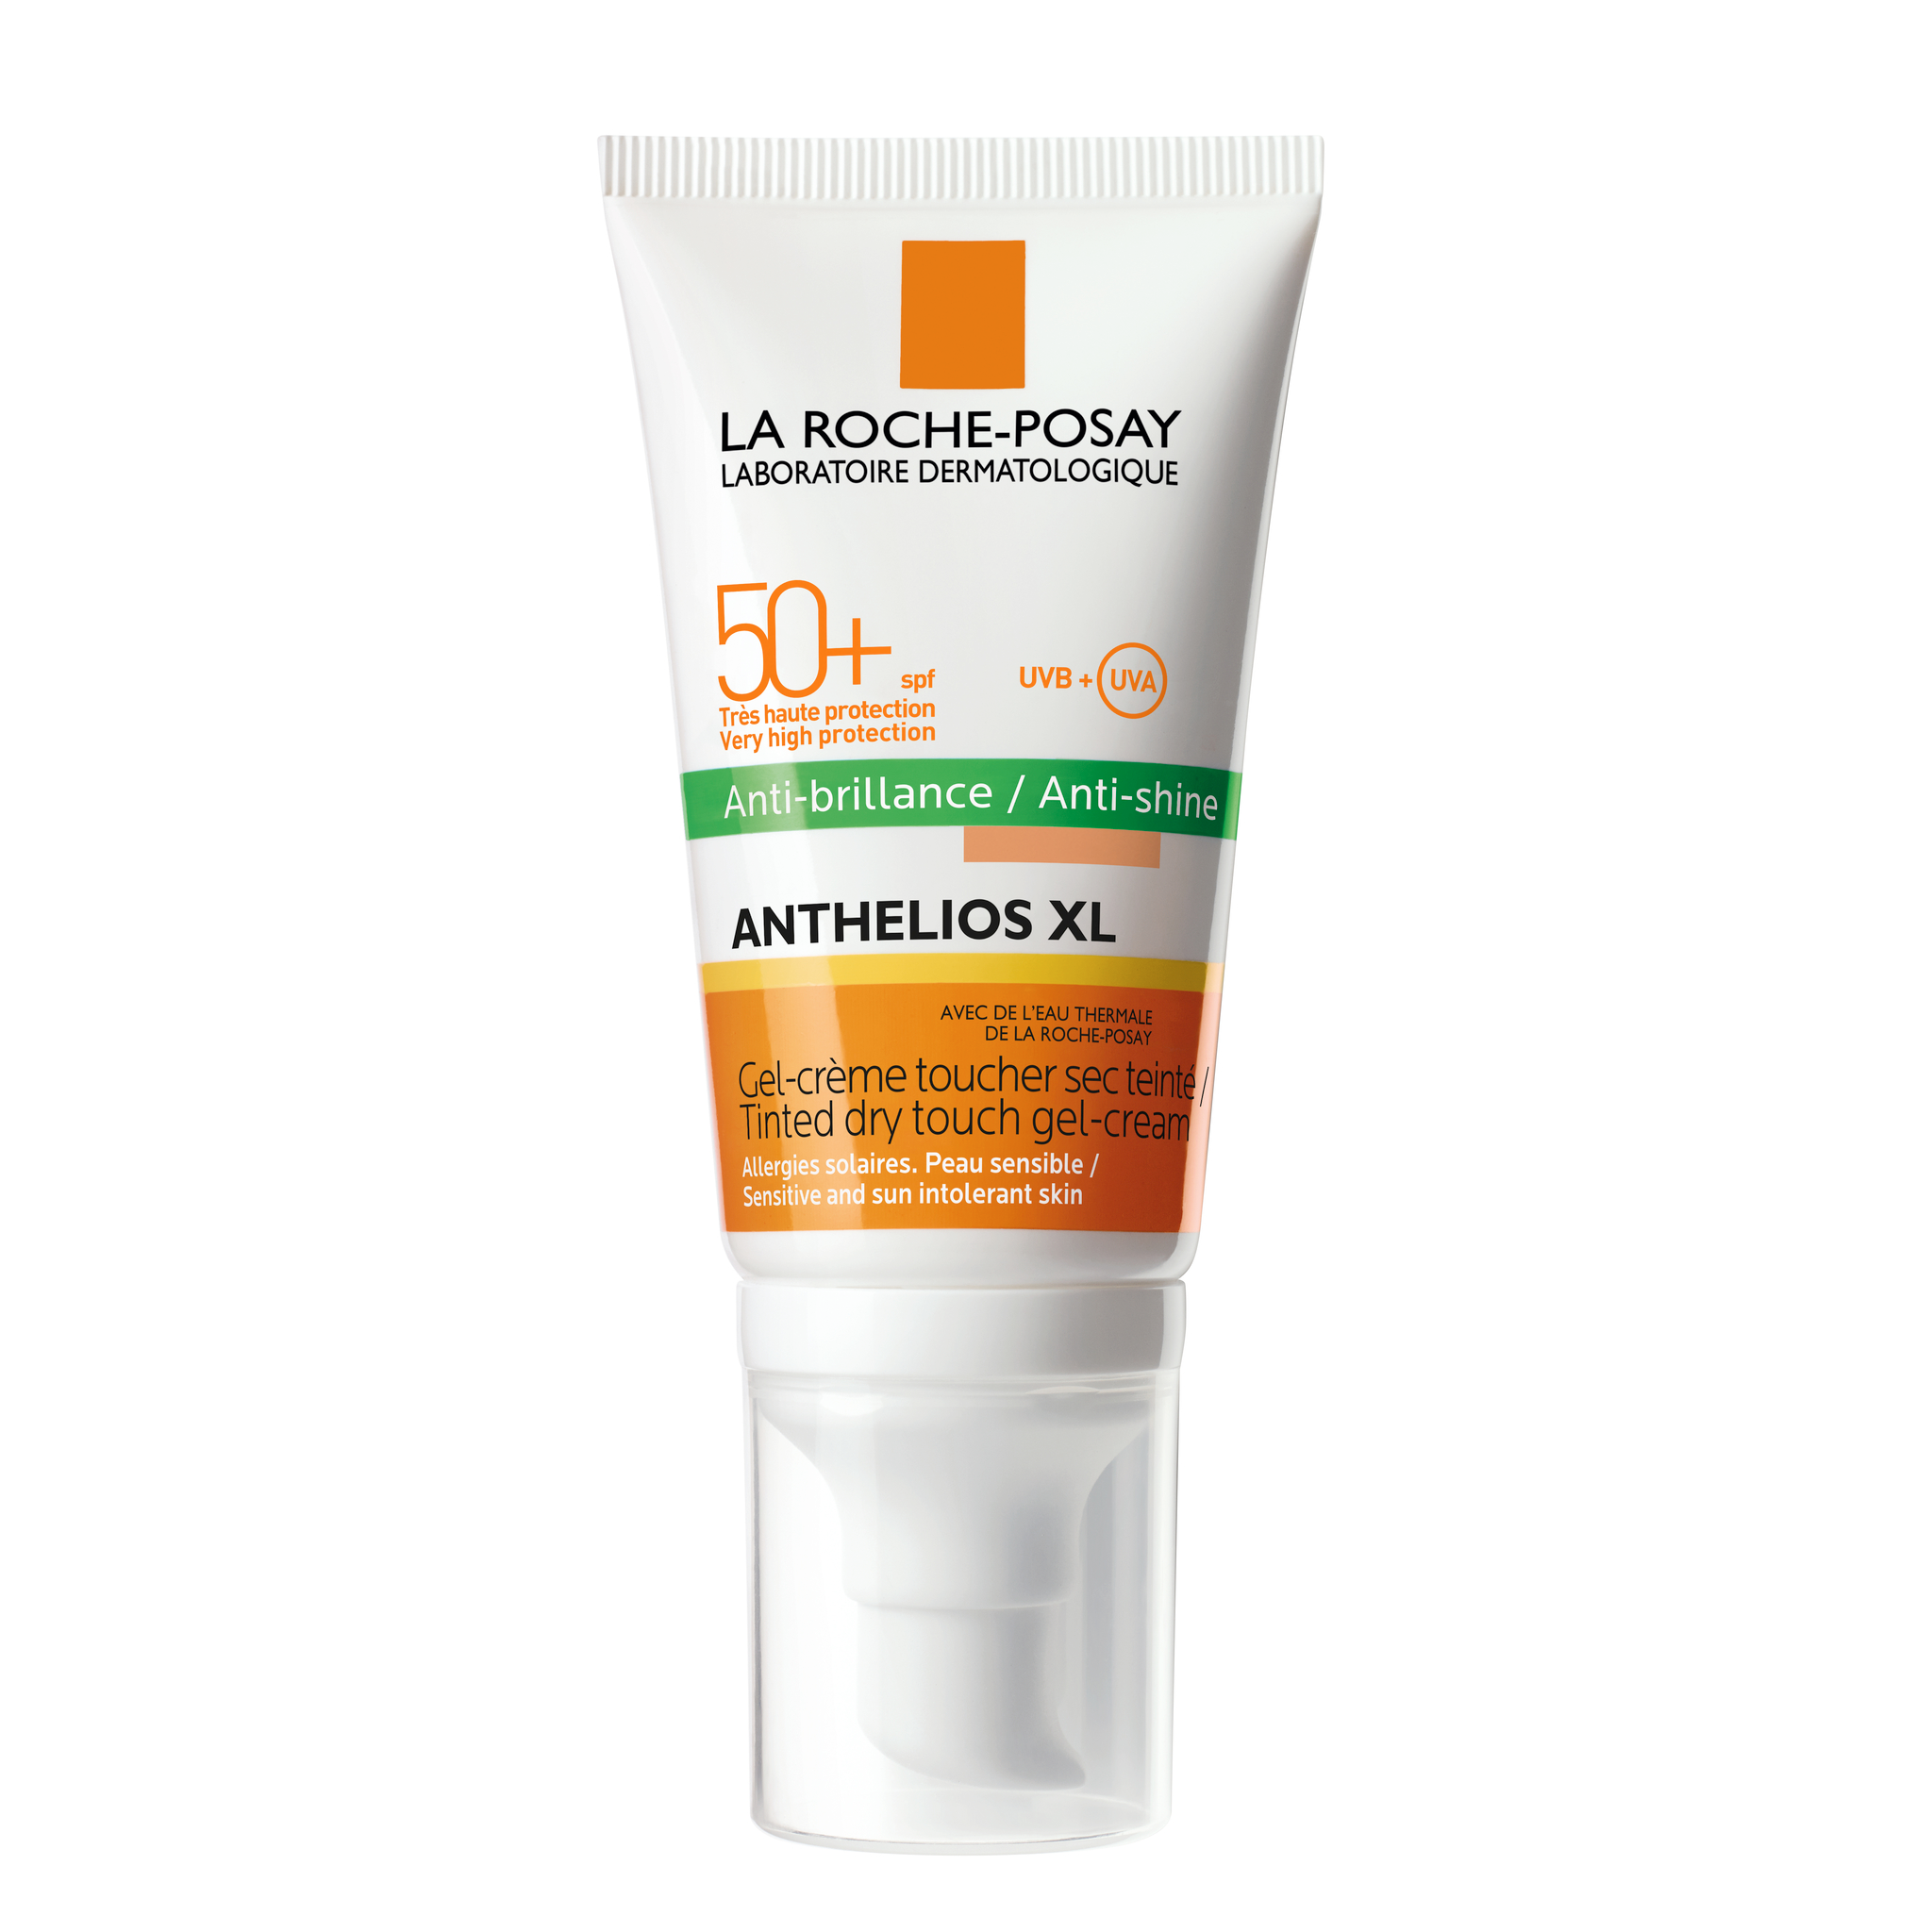 La Roche-Posay Anthelios Tinted Dry Touch Gel-Cream SPF50+ 50ml